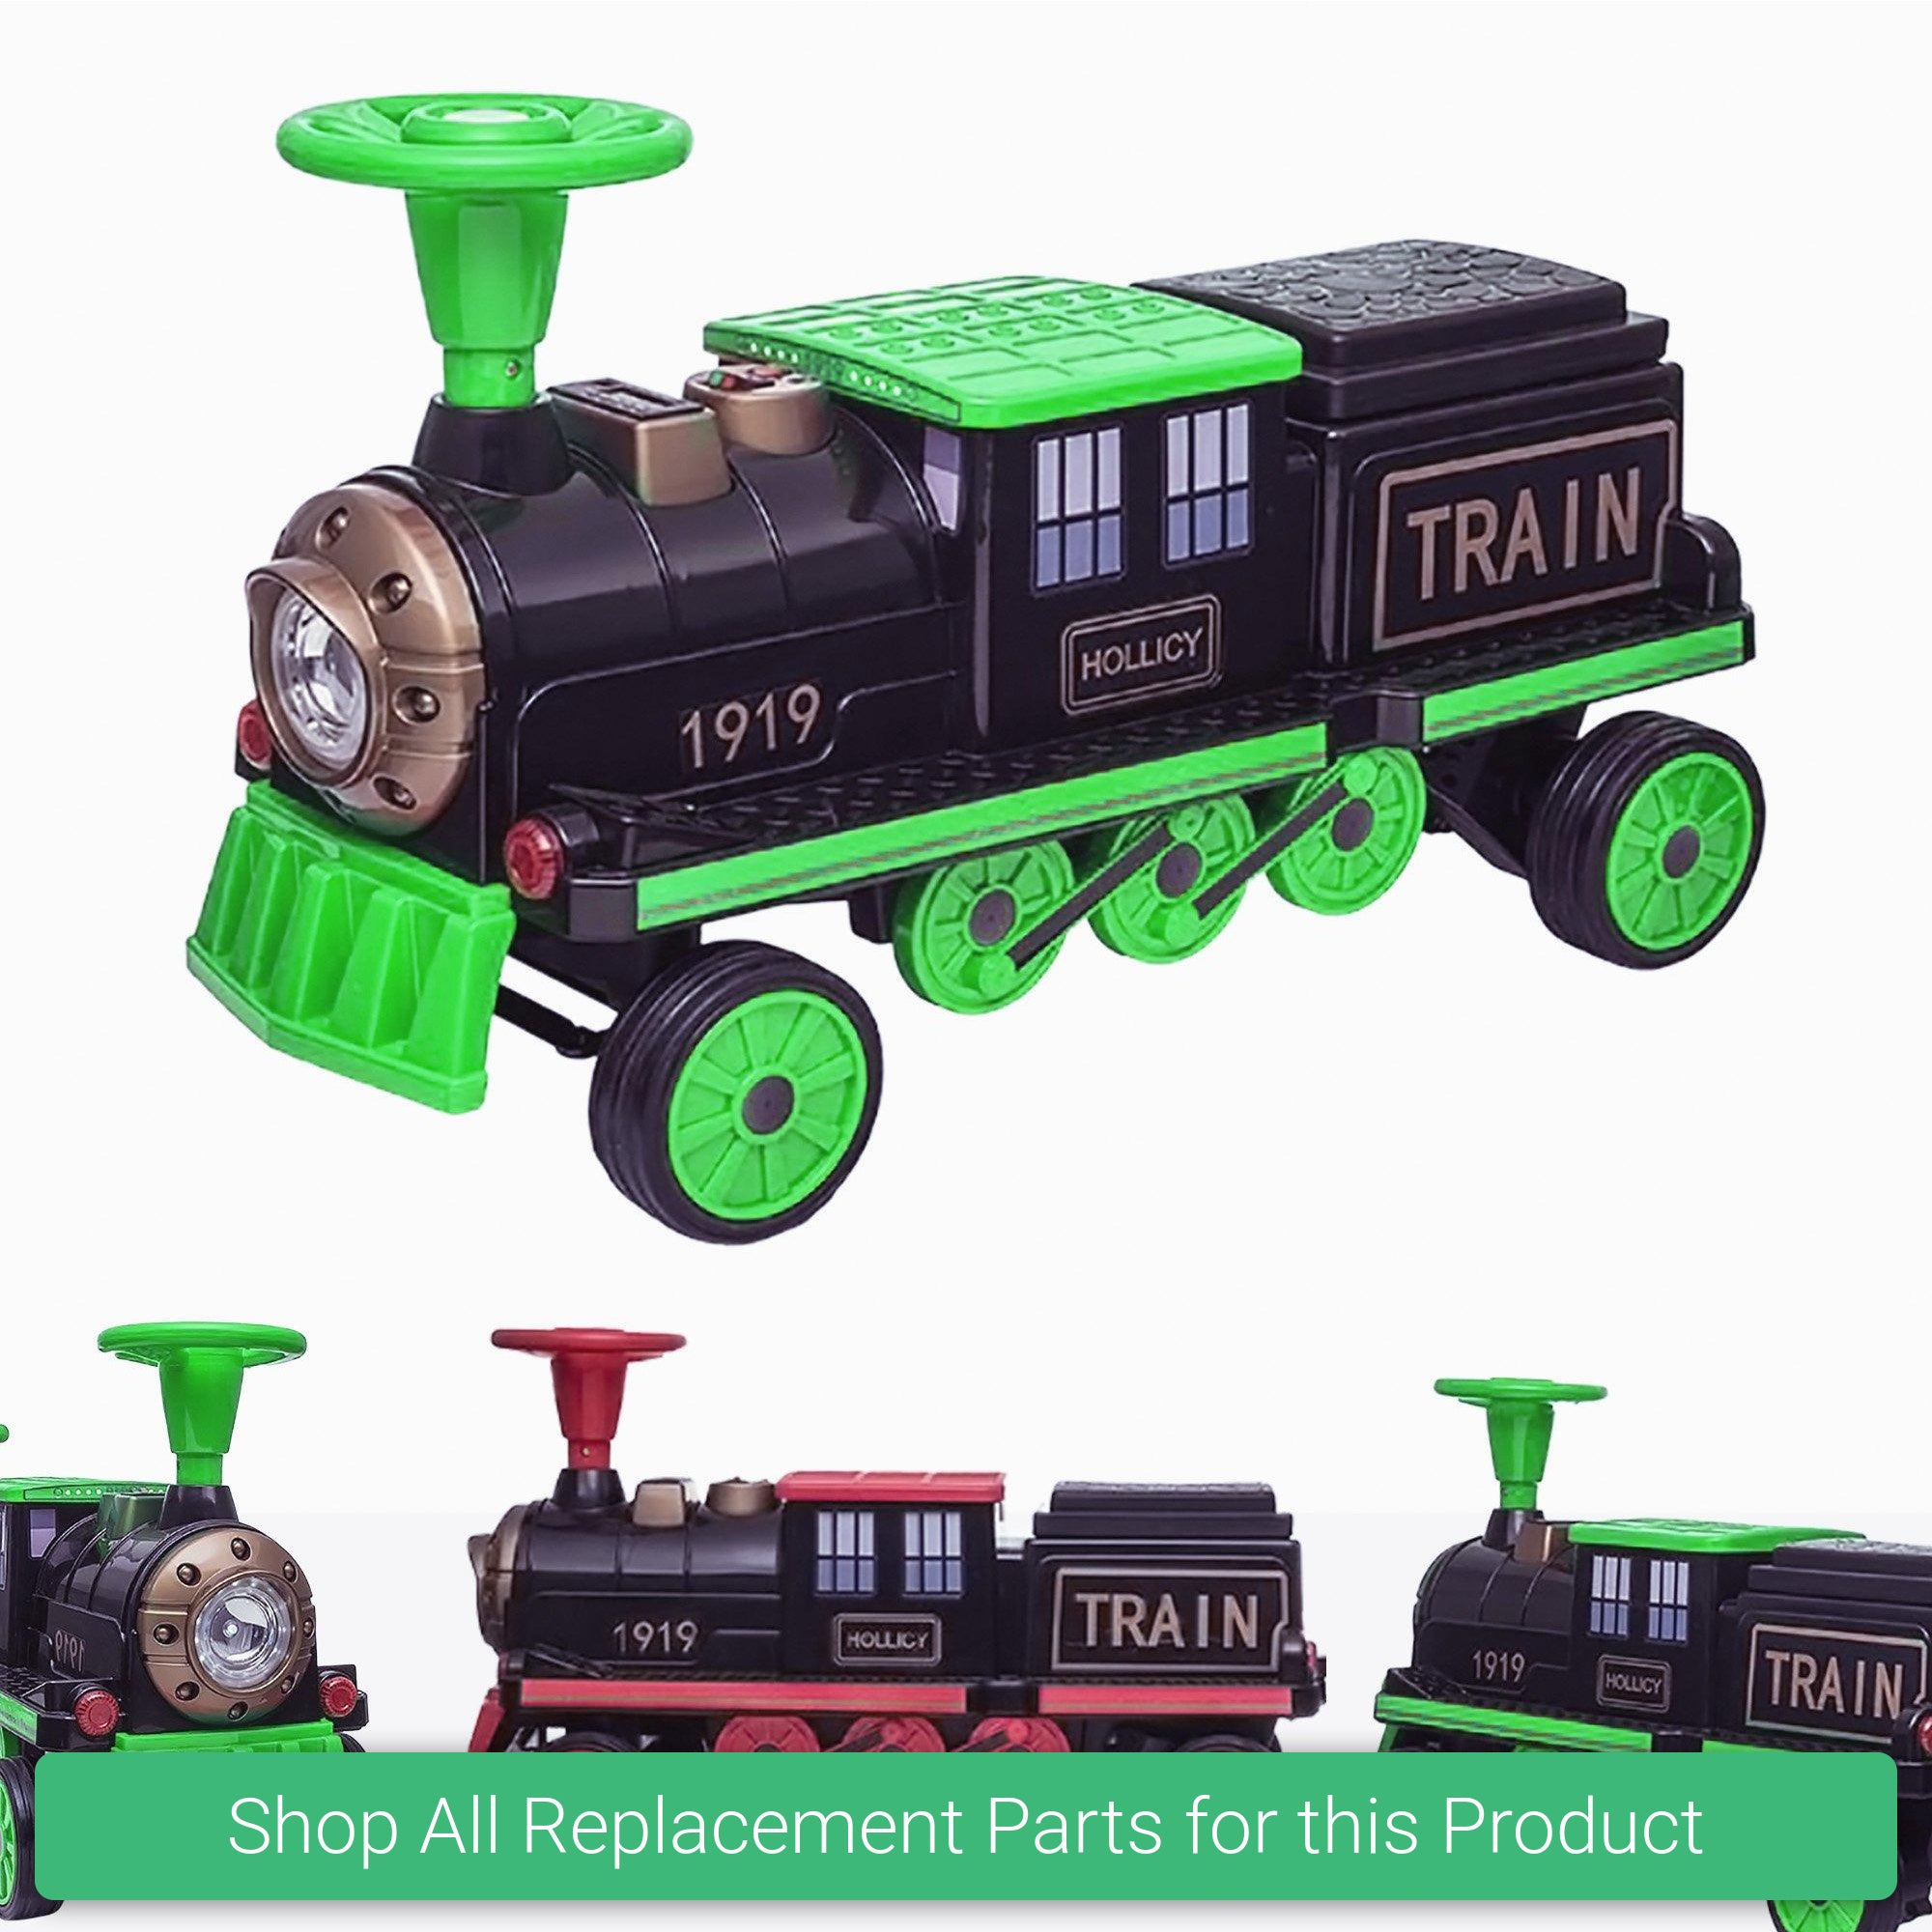 Replacement Parts and Spares for Kids RiiRoo ChooChoo™ Electric Train - TRN-20-VARI - SX1919